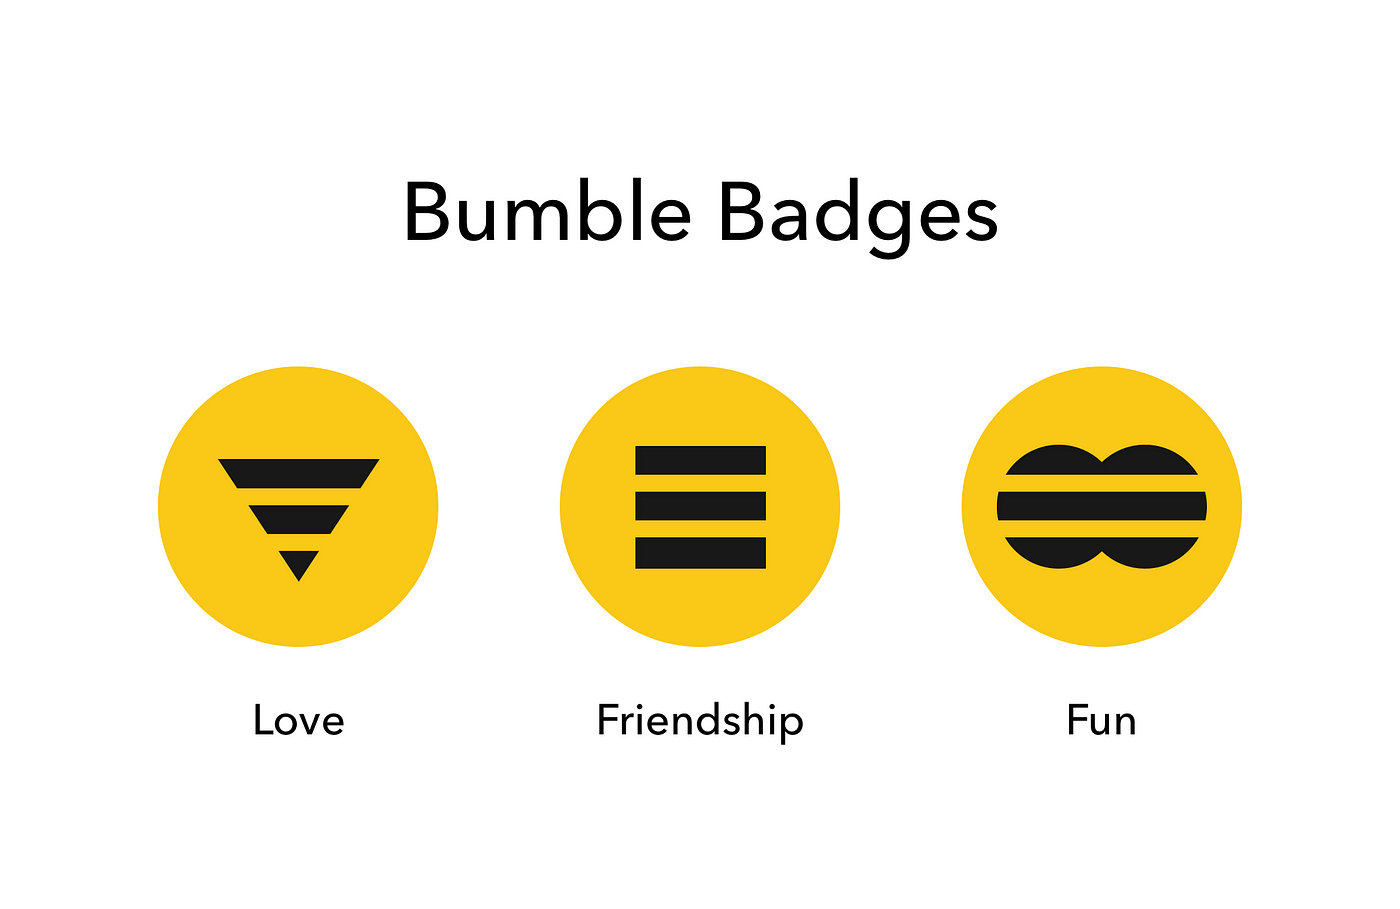 Dating has become just swiping. Bumble Badges take you back to the streets  again., by Lubena Awan